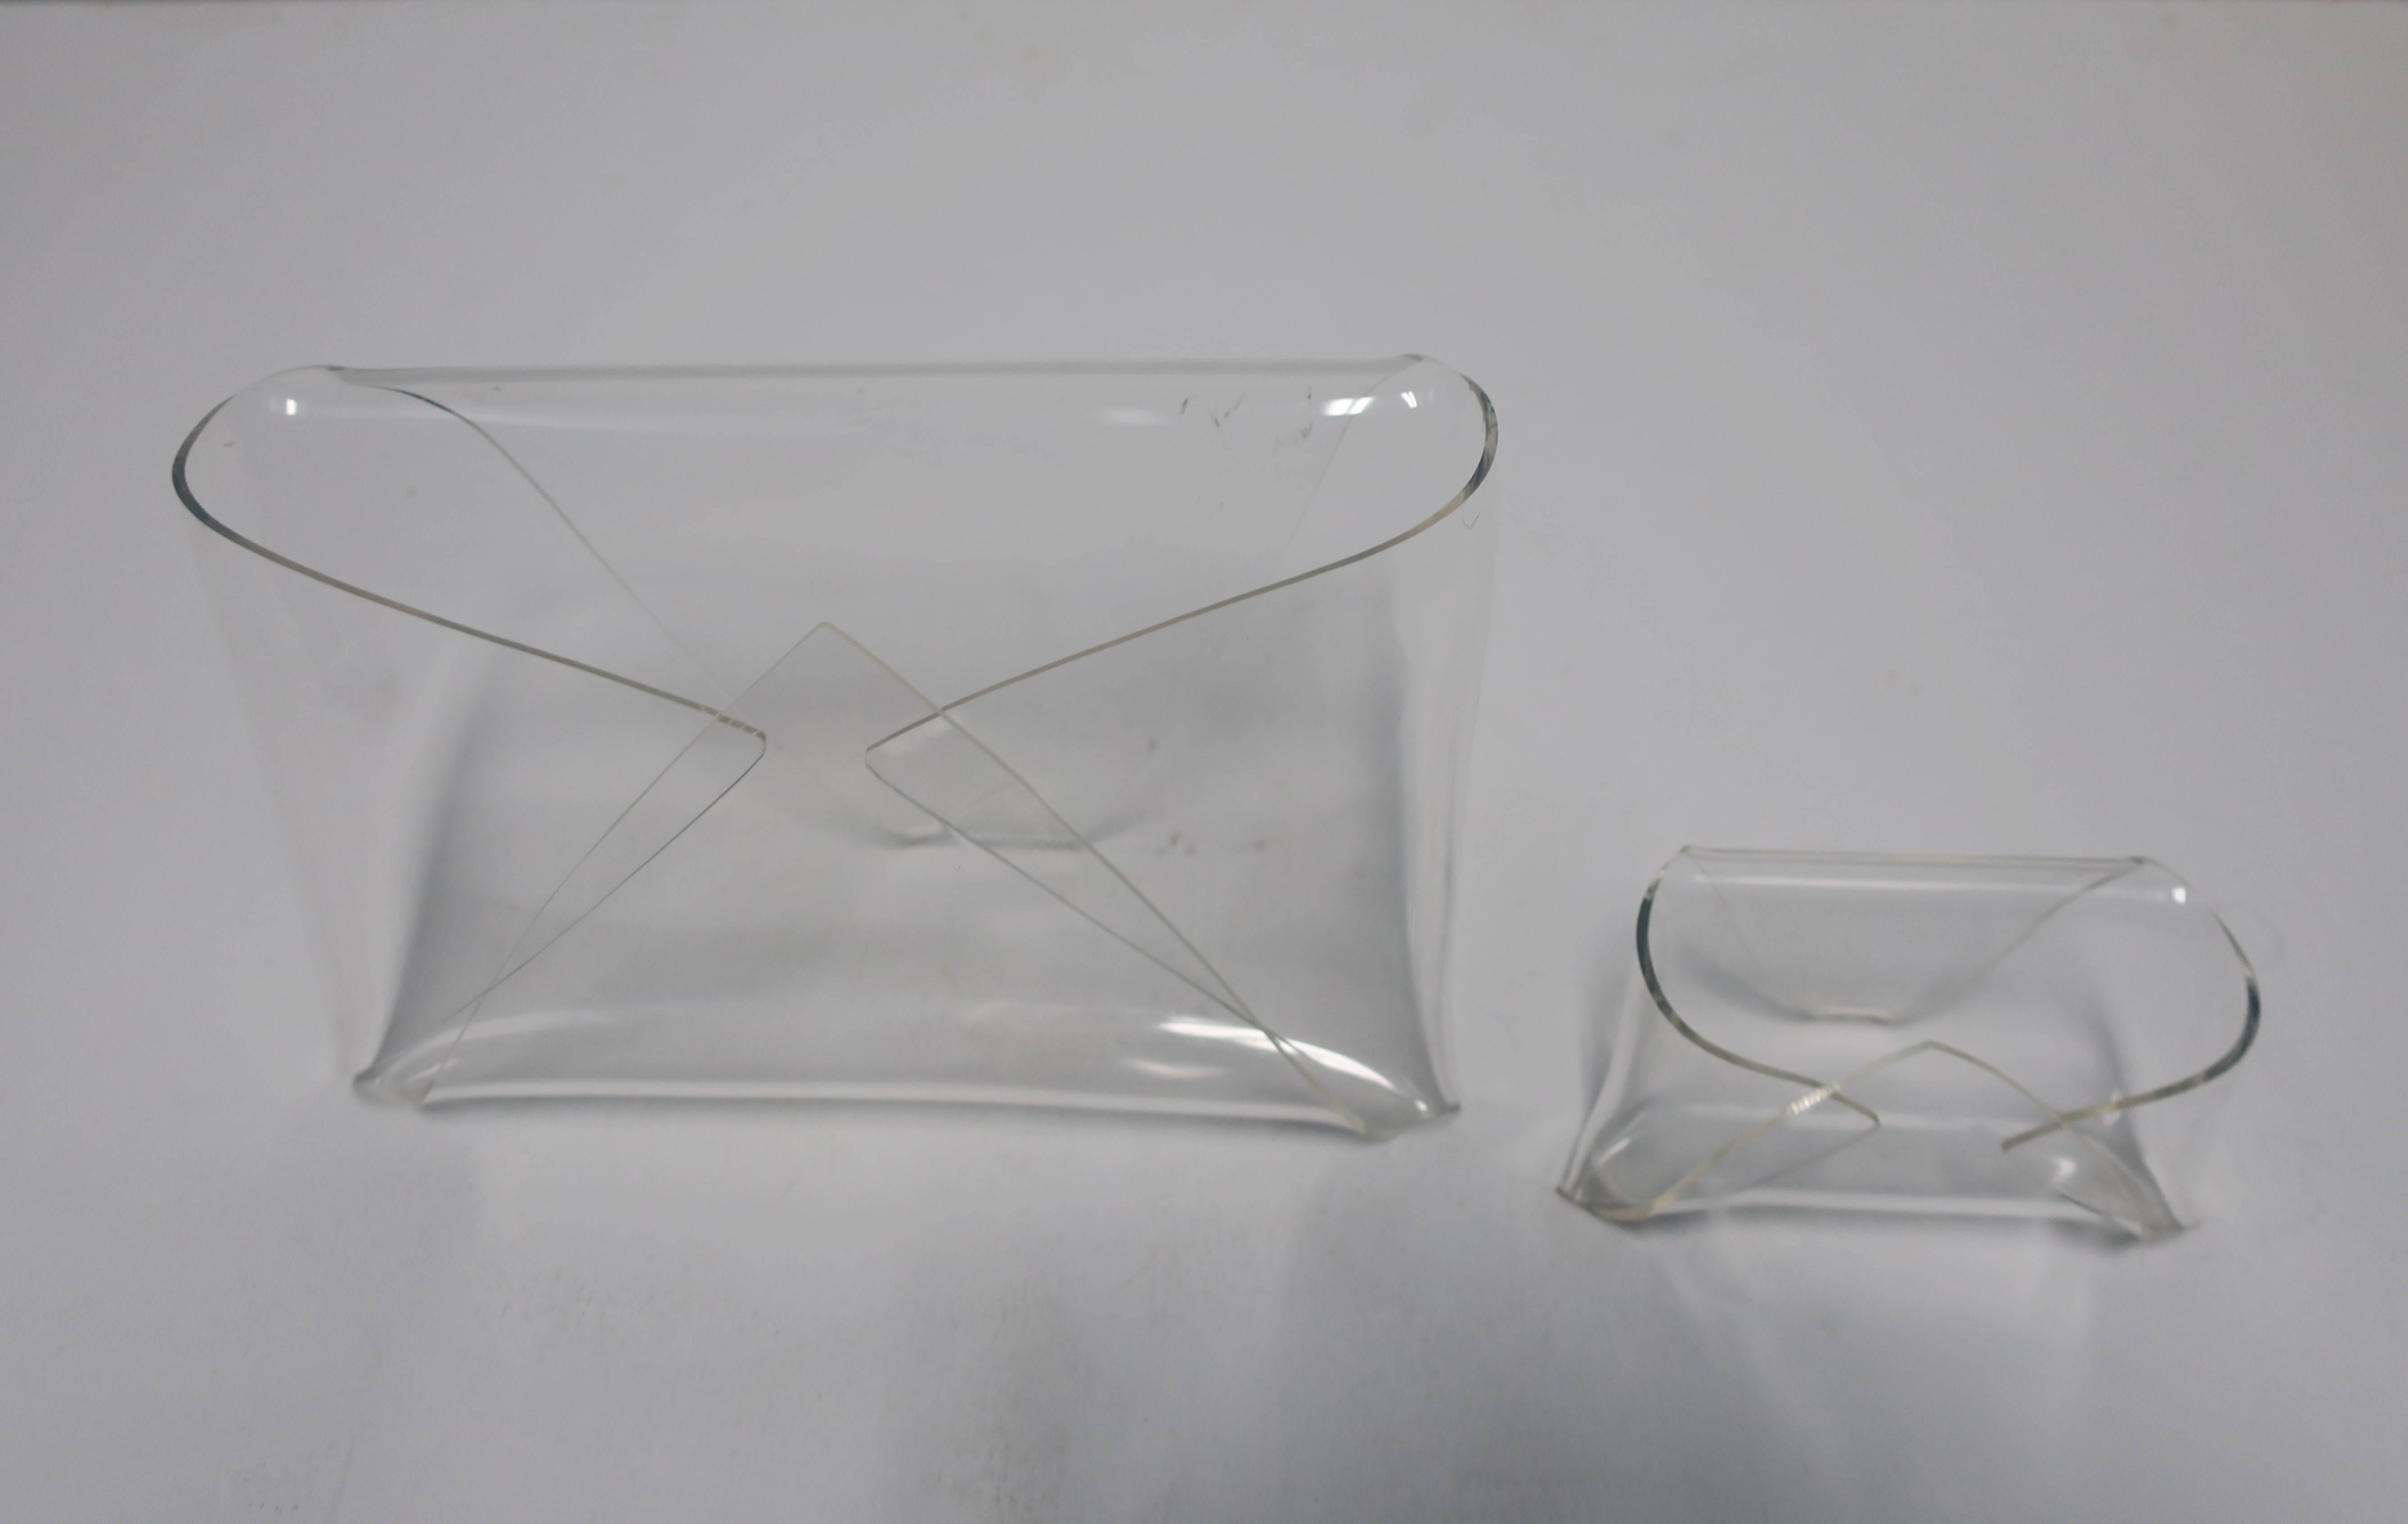 A vintage Lucite or acrylic mail and business card desk set. Clear acrylic is strategically bent into an 'envelope' form. Convenient for a desk for display area. Measurements include: 8